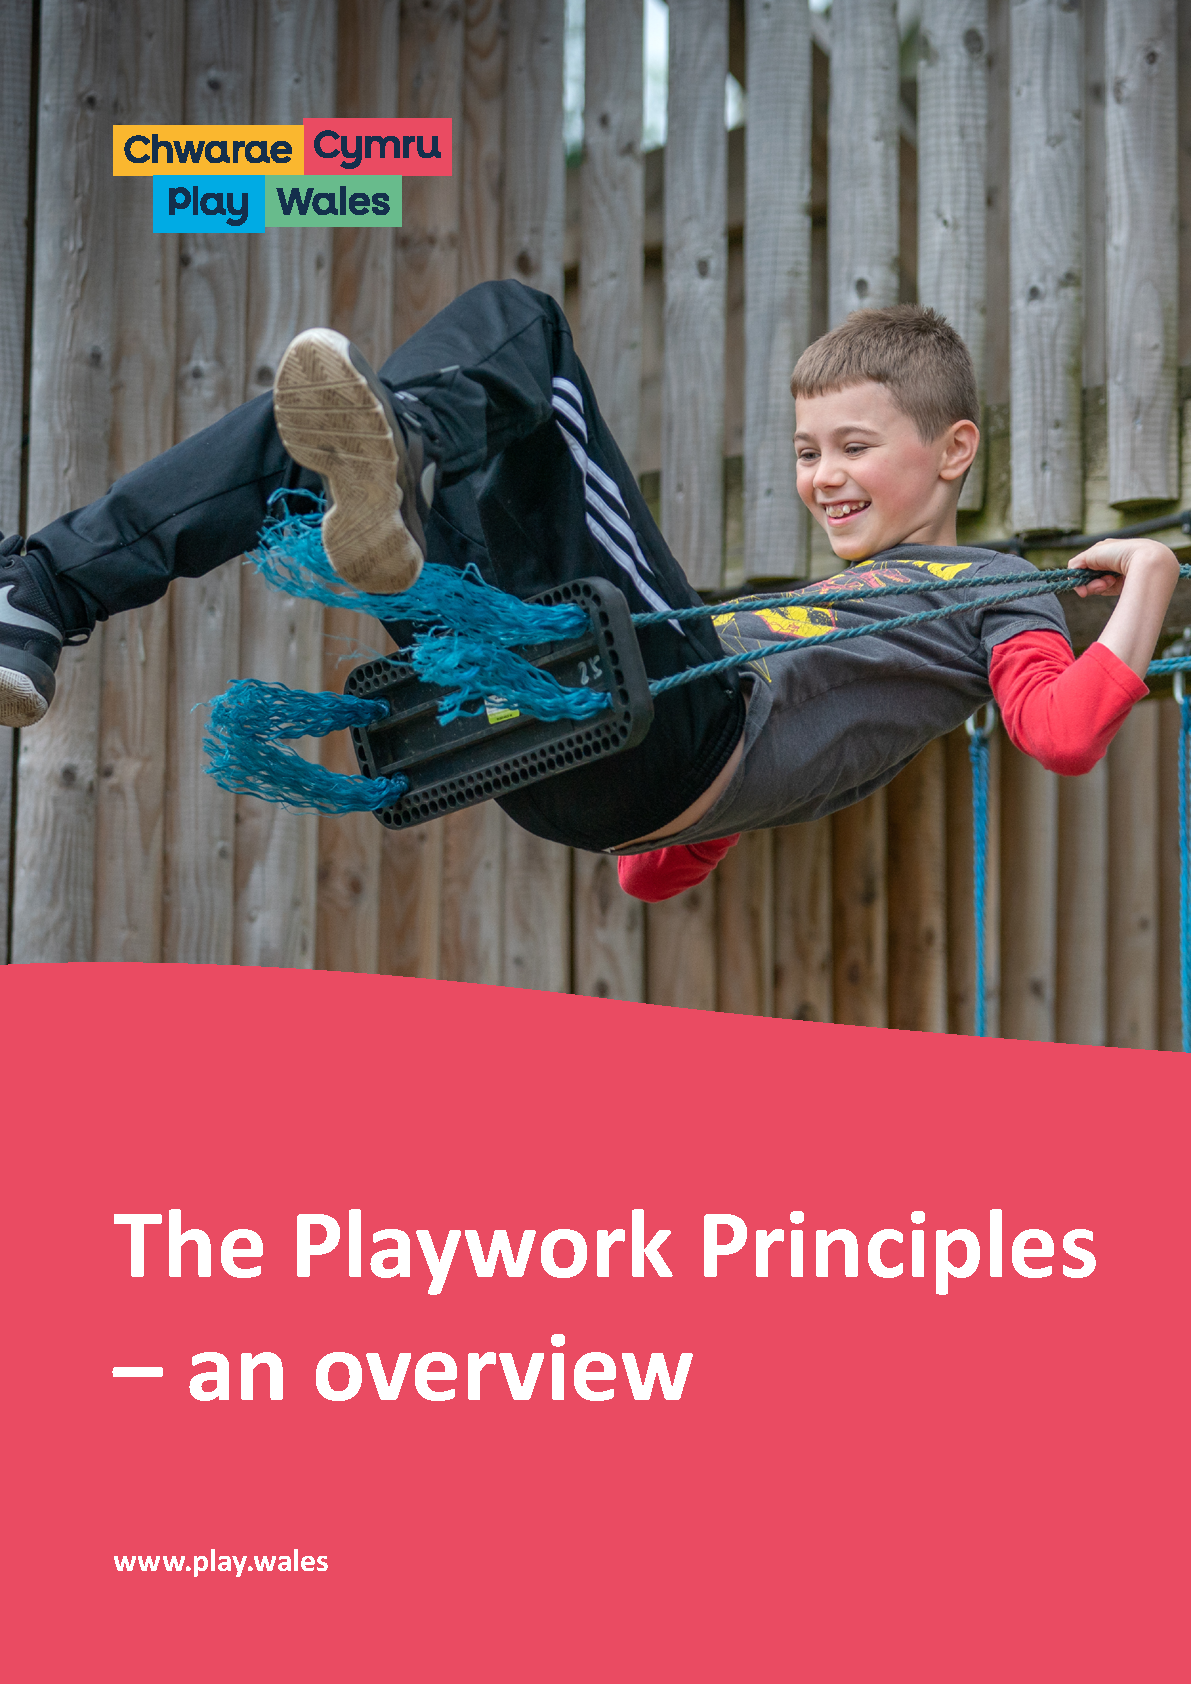 The Playwork Principles – an overview